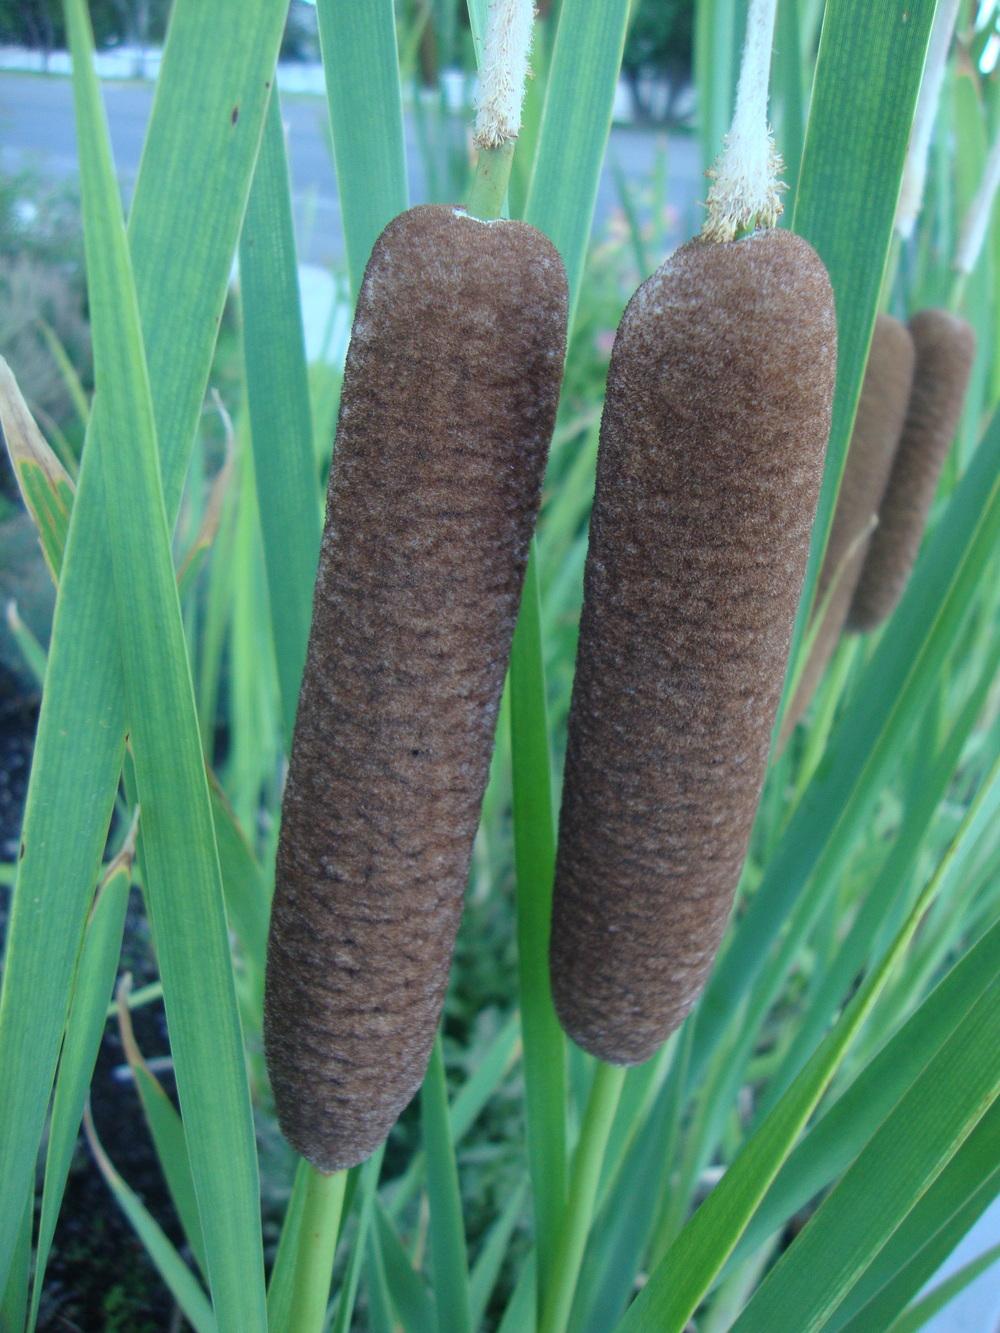 Photo of Cattail (Typha latifolia) uploaded by Paul2032